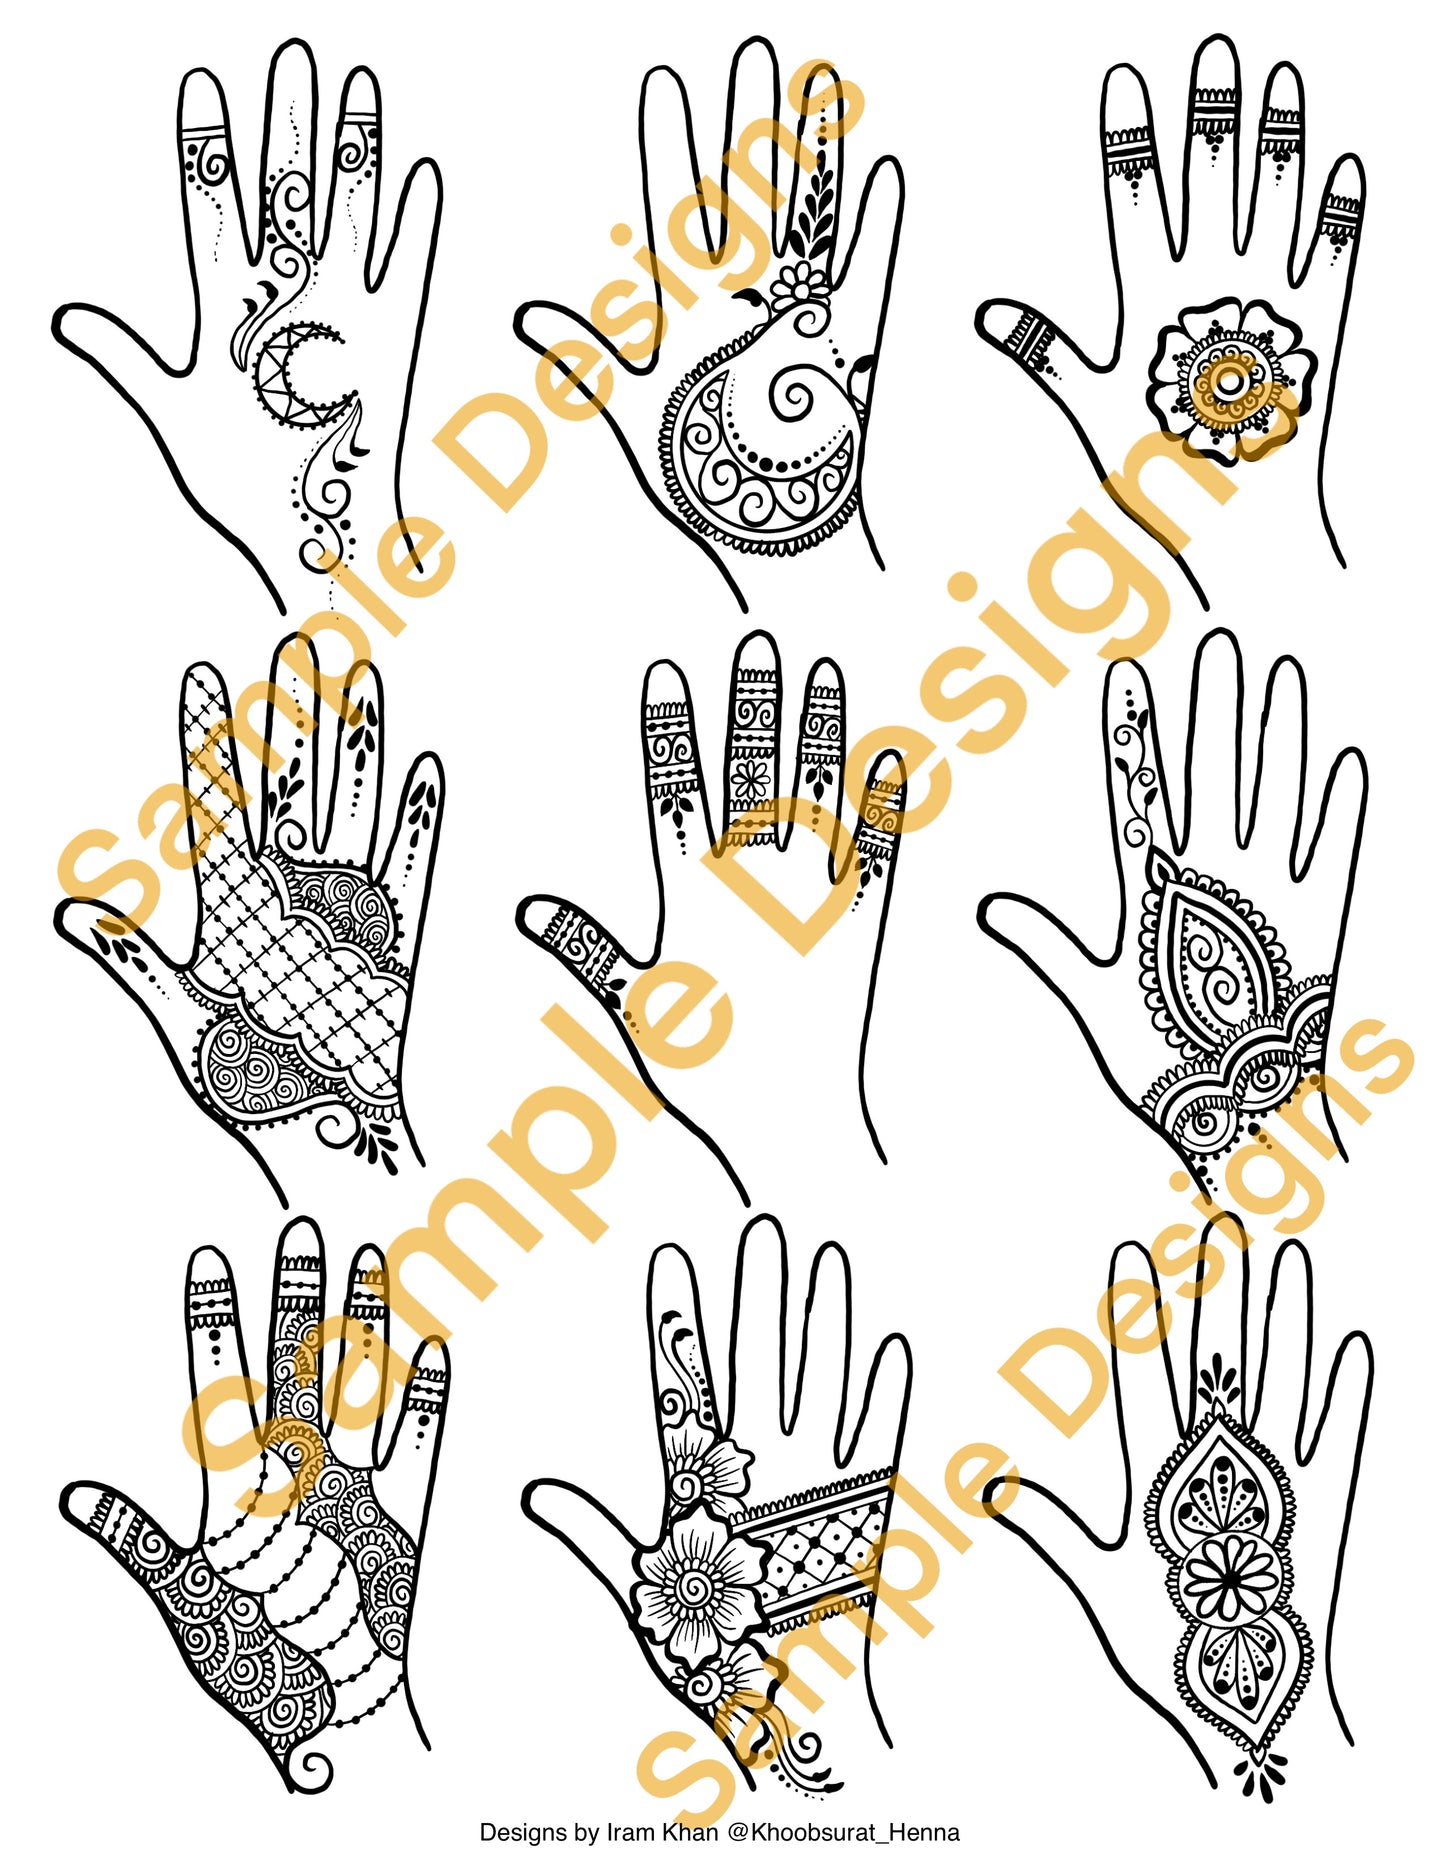 Henna Design Book with Over 100 Pages and Over 375 Designs PDF Digital Download